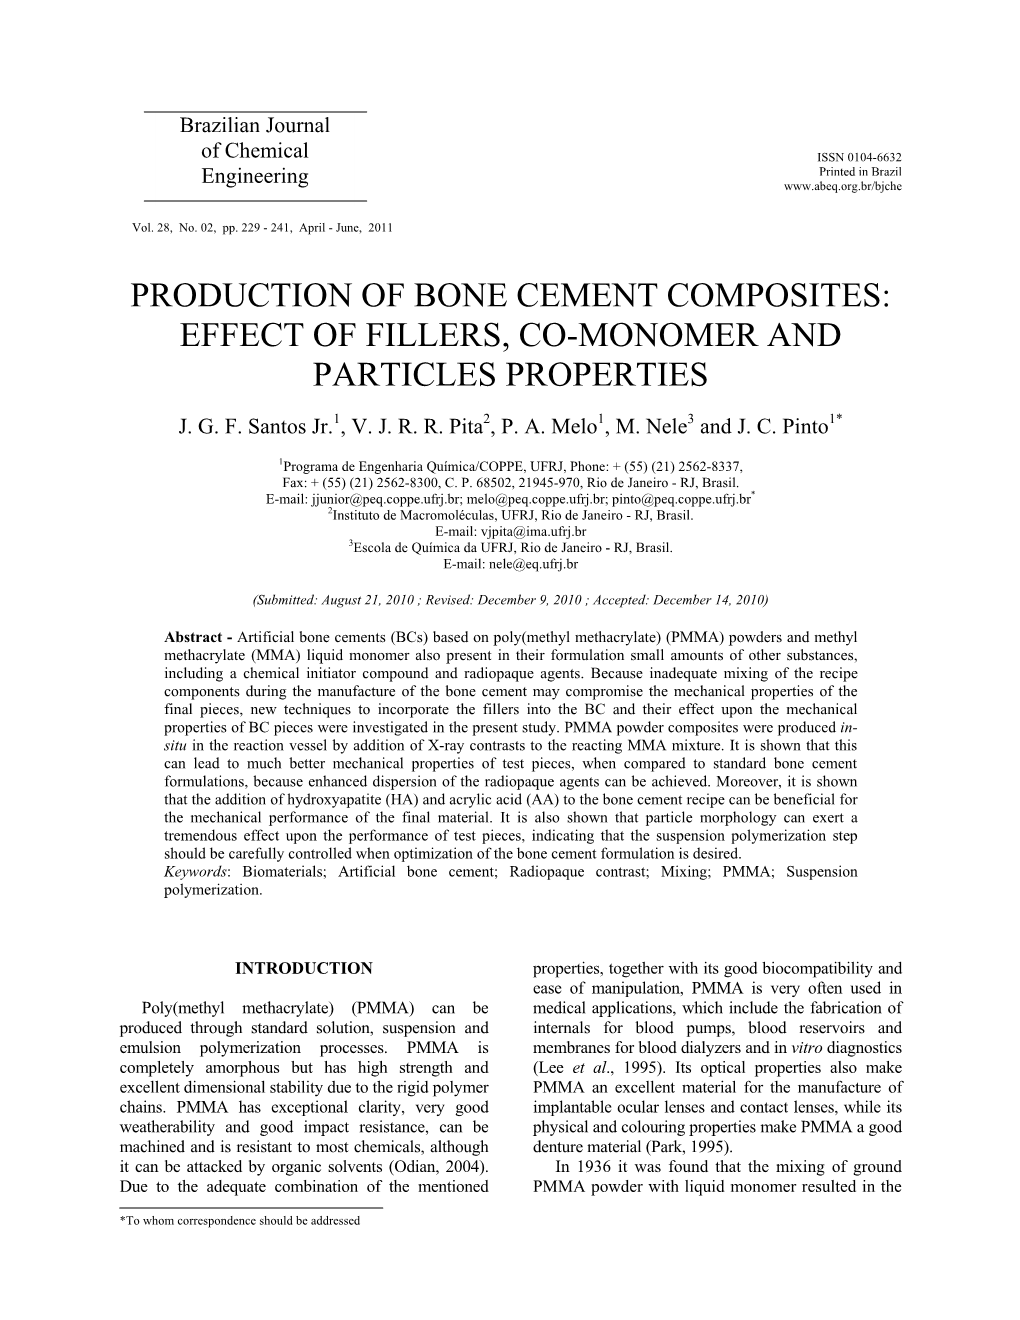 Production of Bone Cement Composites: Effect of Fillers, Co-Monomer and Particles Properties